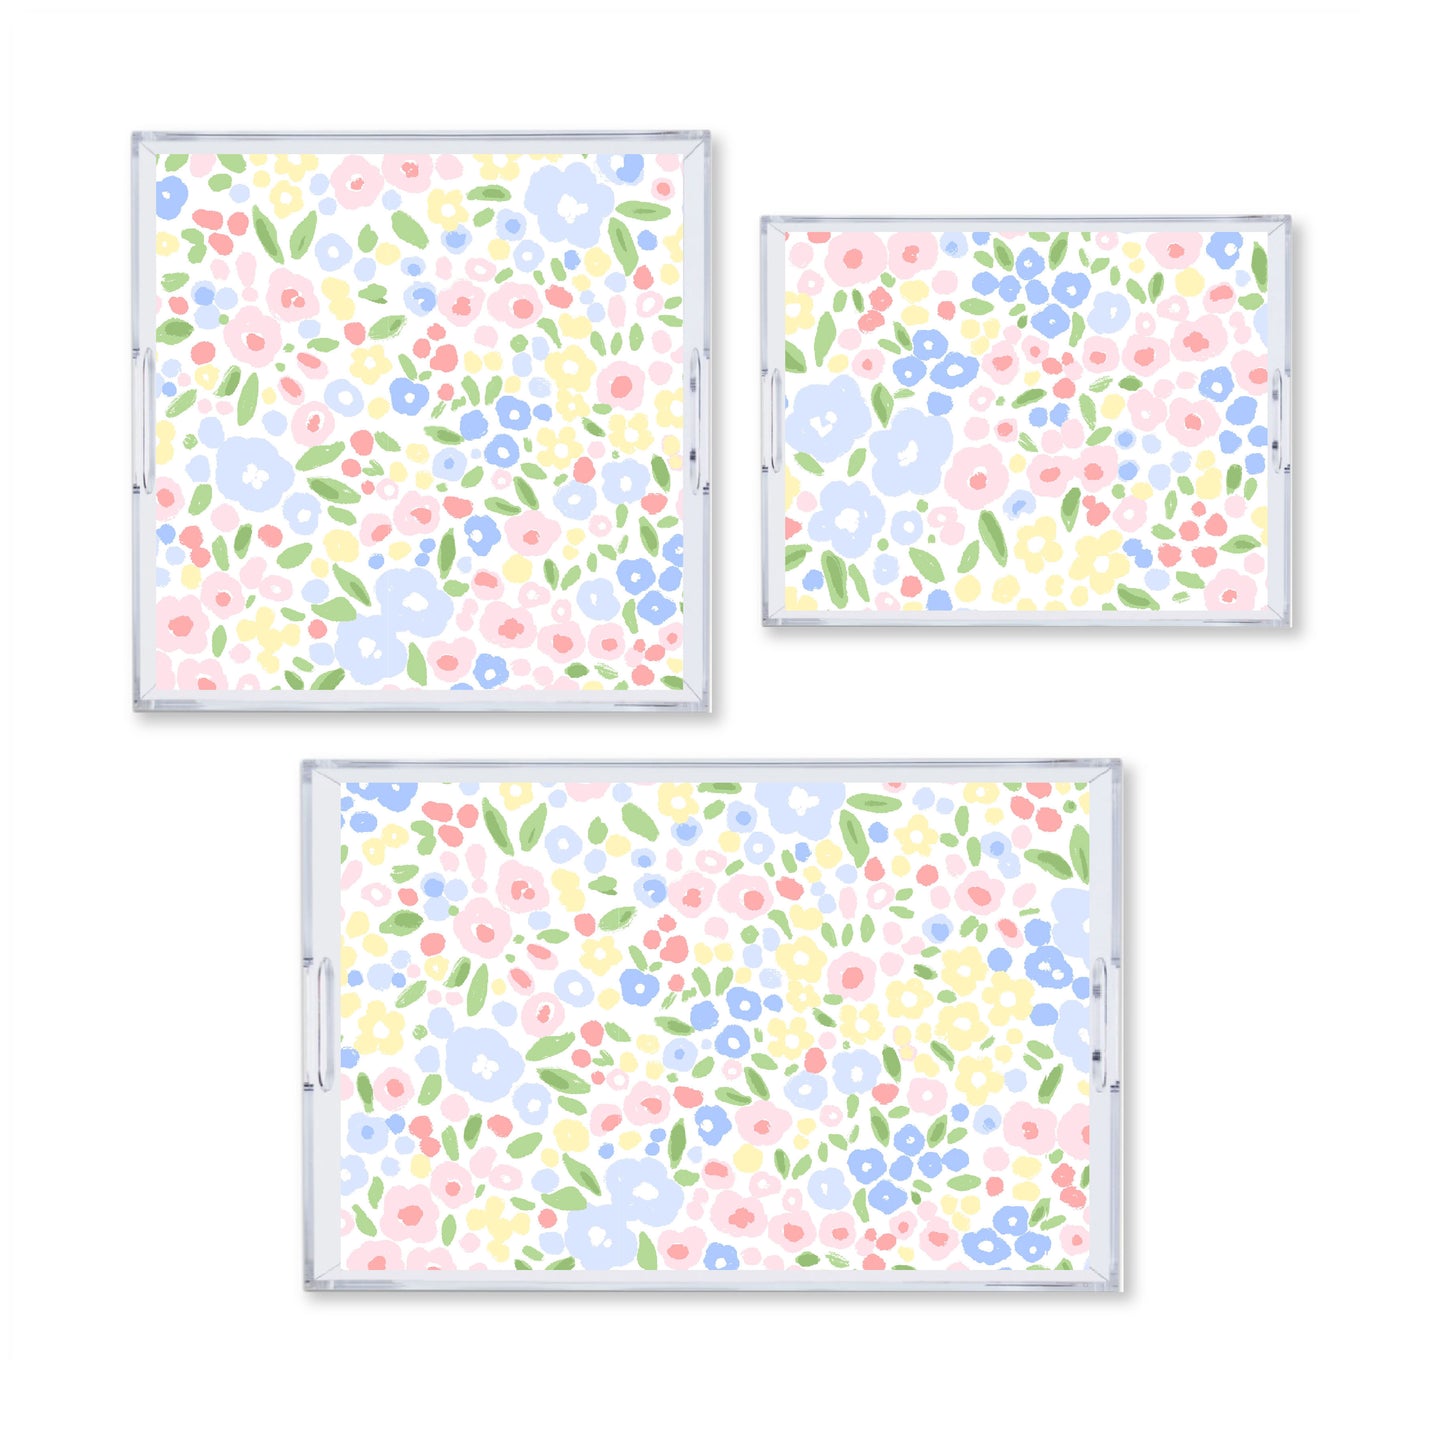 Floral Toss Reversible Acrylic Tray With Optional Monogram - Available In 3 Sizes